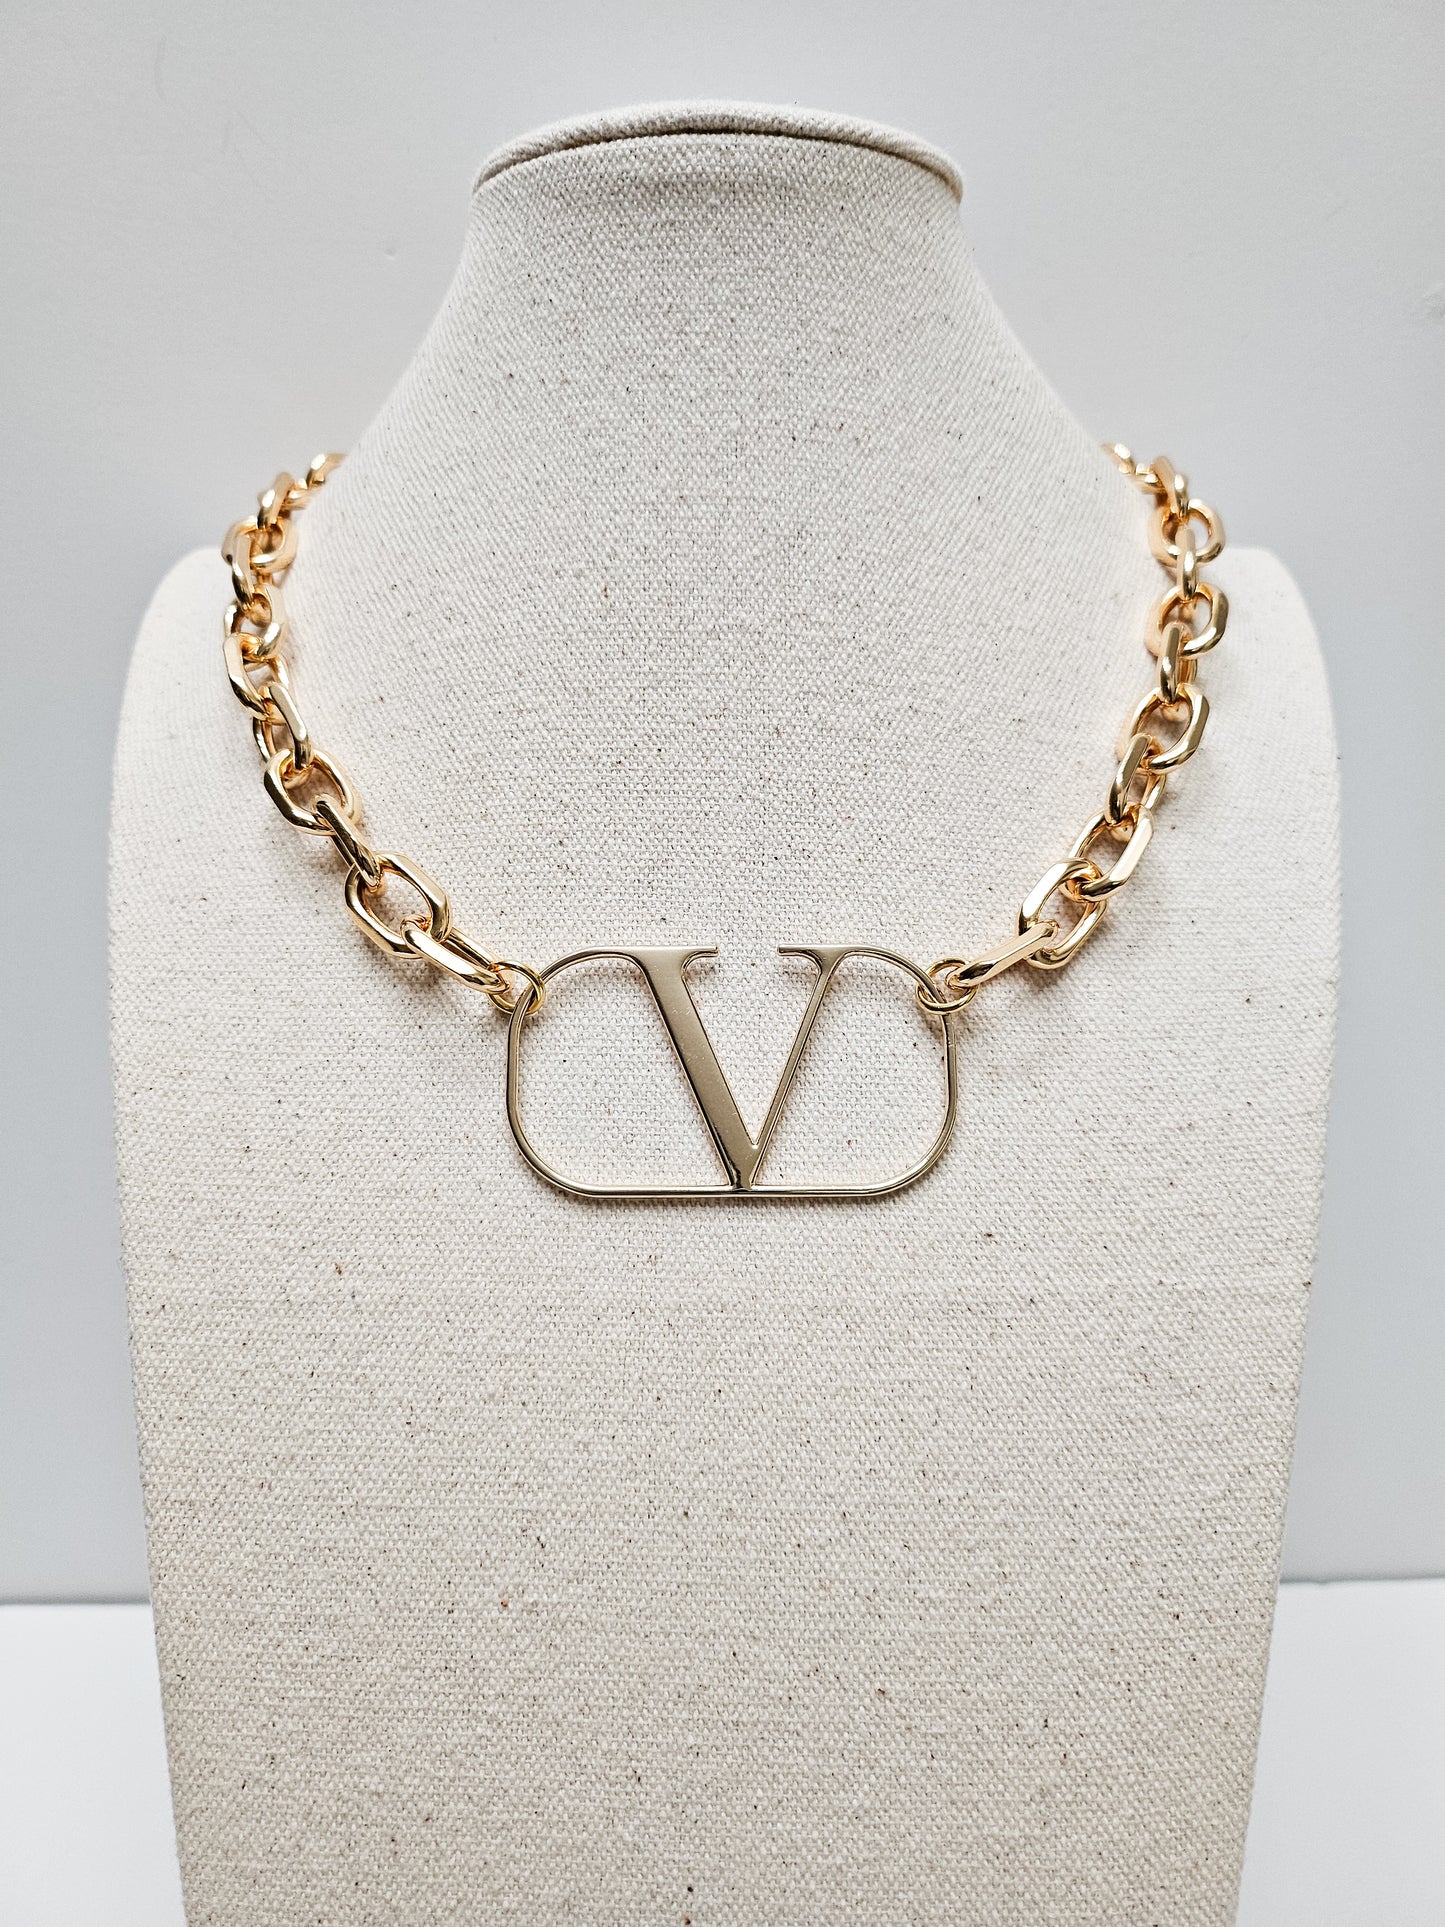 Val Large Charm Chunky Necklace